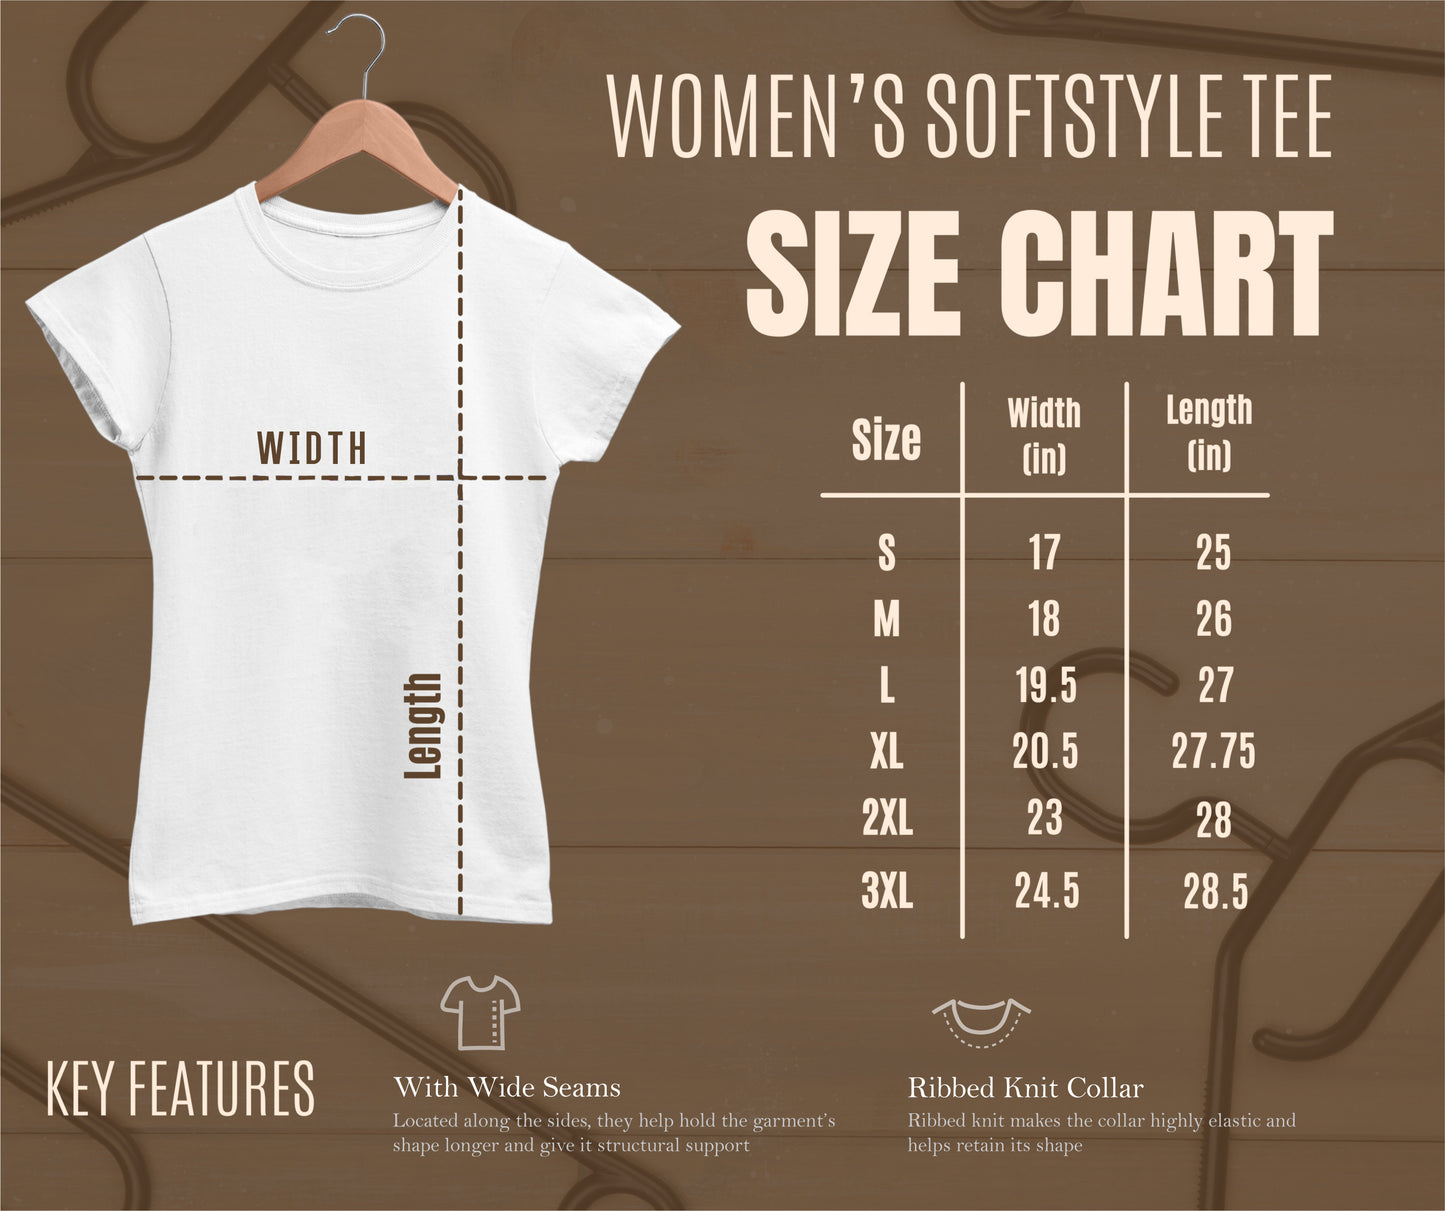 Lily Flower - Women's Softstyle Tee